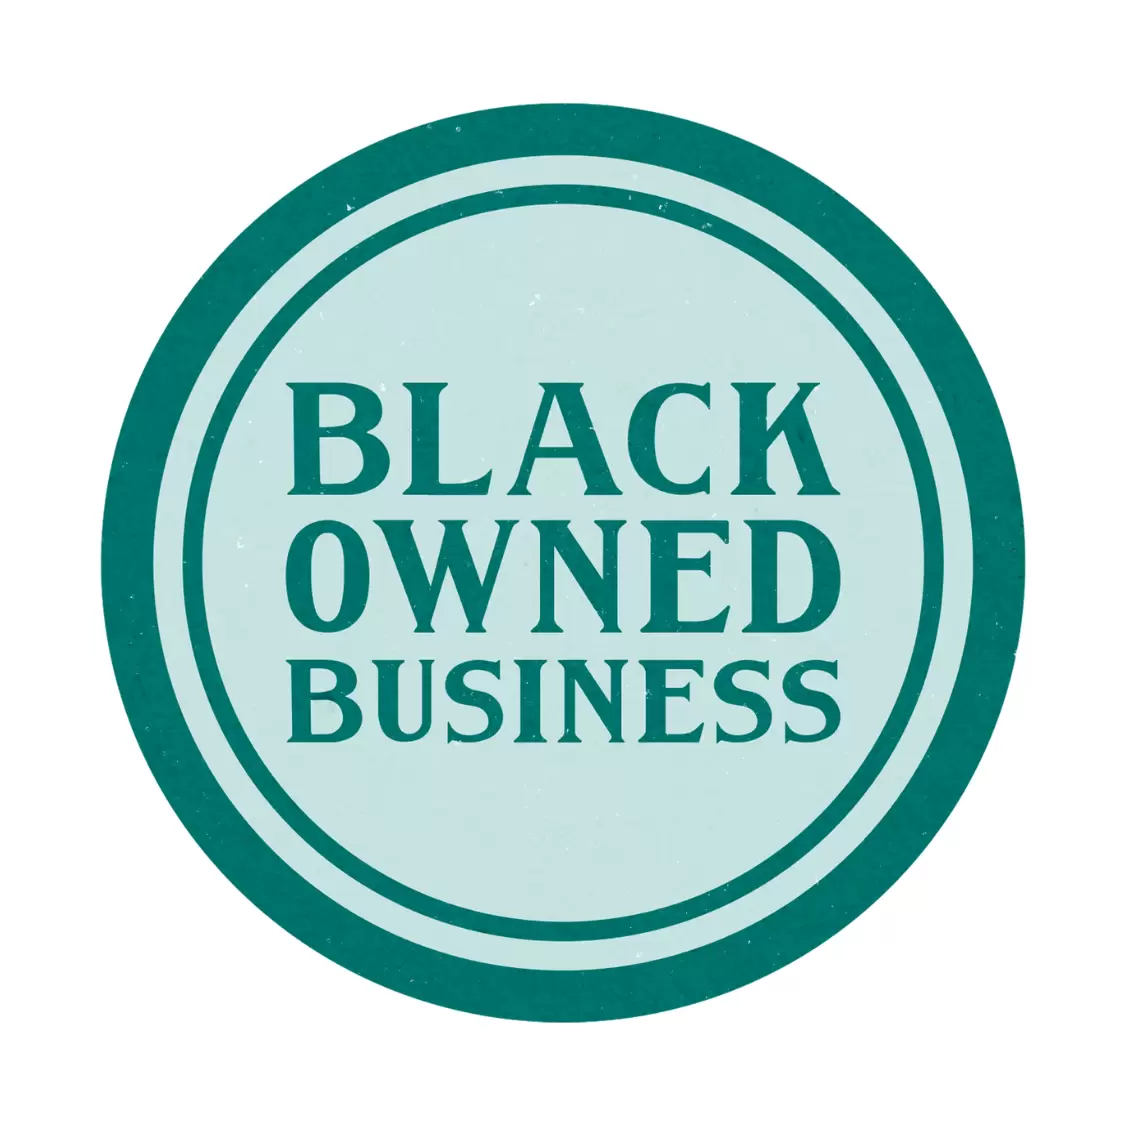 Black owned business badge